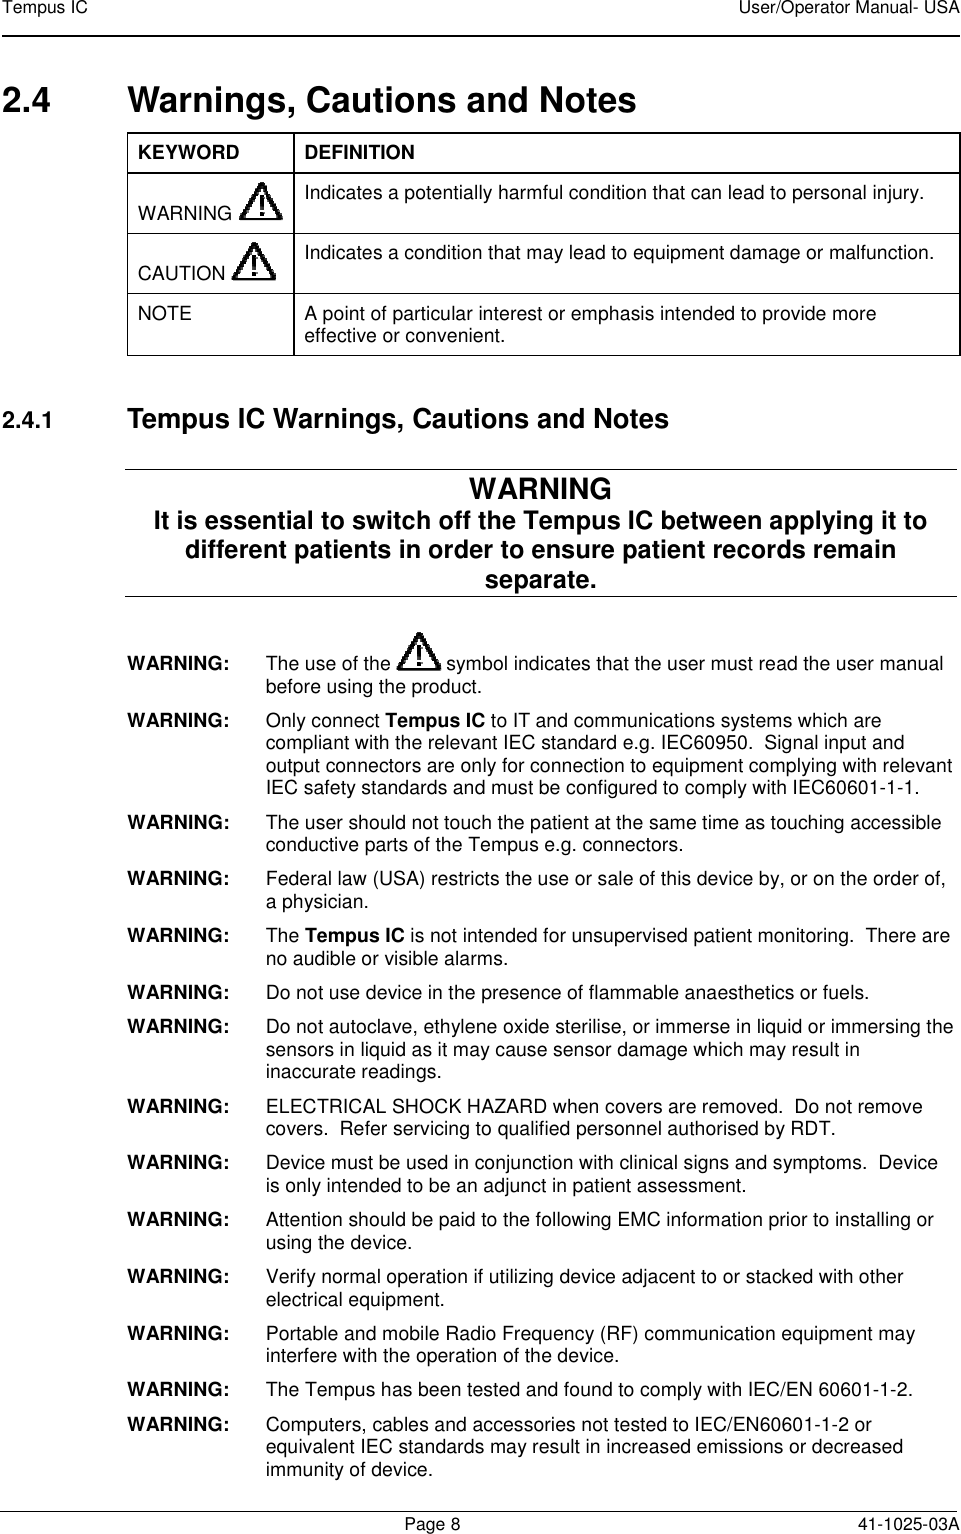 Tempus IC    User/Operator Manual- USA        Page 8  41-1025-03A 2.4  Warnings, Cautions and Notes KEYWORD DEFINITION WARNING  Indicates a potentially harmful condition that can lead to personal injury.  CAUTION    Indicates a condition that may lead to equipment damage or malfunction.  NOTE  A point of particular interest or emphasis intended to provide more effective or convenient.   2.4.1 Tempus IC Warnings, Cautions and Notes WARNING  It is essential to switch off the Tempus IC between applying it to different patients in order to ensure patient records remain separate. WARNING:  The use of the   symbol indicates that the user must read the user manual before using the product. WARNING:    Only connect Tempus IC to IT and communications systems which are compliant with the relevant IEC standard e.g. IEC60950.  Signal input and output connectors are only for connection to equipment complying with relevant IEC safety standards and must be configured to comply with IEC60601-1-1. WARNING:    The user should not touch the patient at the same time as touching accessible conductive parts of the Tempus e.g. connectors. WARNING:  Federal law (USA) restricts the use or sale of this device by, or on the order of, a physician. WARNING:  The Tempus IC is not intended for unsupervised patient monitoring.  There are no audible or visible alarms. WARNING:  Do not use device in the presence of flammable anaesthetics or fuels. WARNING:  Do not autoclave, ethylene oxide sterilise, or immerse in liquid or immersing the sensors in liquid as it may cause sensor damage which may result in inaccurate readings. WARNING:  ELECTRICAL SHOCK HAZARD when covers are removed.  Do not remove covers.  Refer servicing to qualified personnel authorised by RDT. WARNING:  Device must be used in conjunction with clinical signs and symptoms.  Device is only intended to be an adjunct in patient assessment. WARNING:   Attention should be paid to the following EMC information prior to installing or using the device.  WARNING:   Verify normal operation if utilizing device adjacent to or stacked with other electrical equipment.  WARNING:   Portable and mobile Radio Frequency (RF) communication equipment may interfere with the operation of the device. WARNING:   The Tempus has been tested and found to comply with IEC/EN 60601-1-2. WARNING:   Computers, cables and accessories not tested to IEC/EN60601-1-2 or equivalent IEC standards may result in increased emissions or decreased immunity of device.  